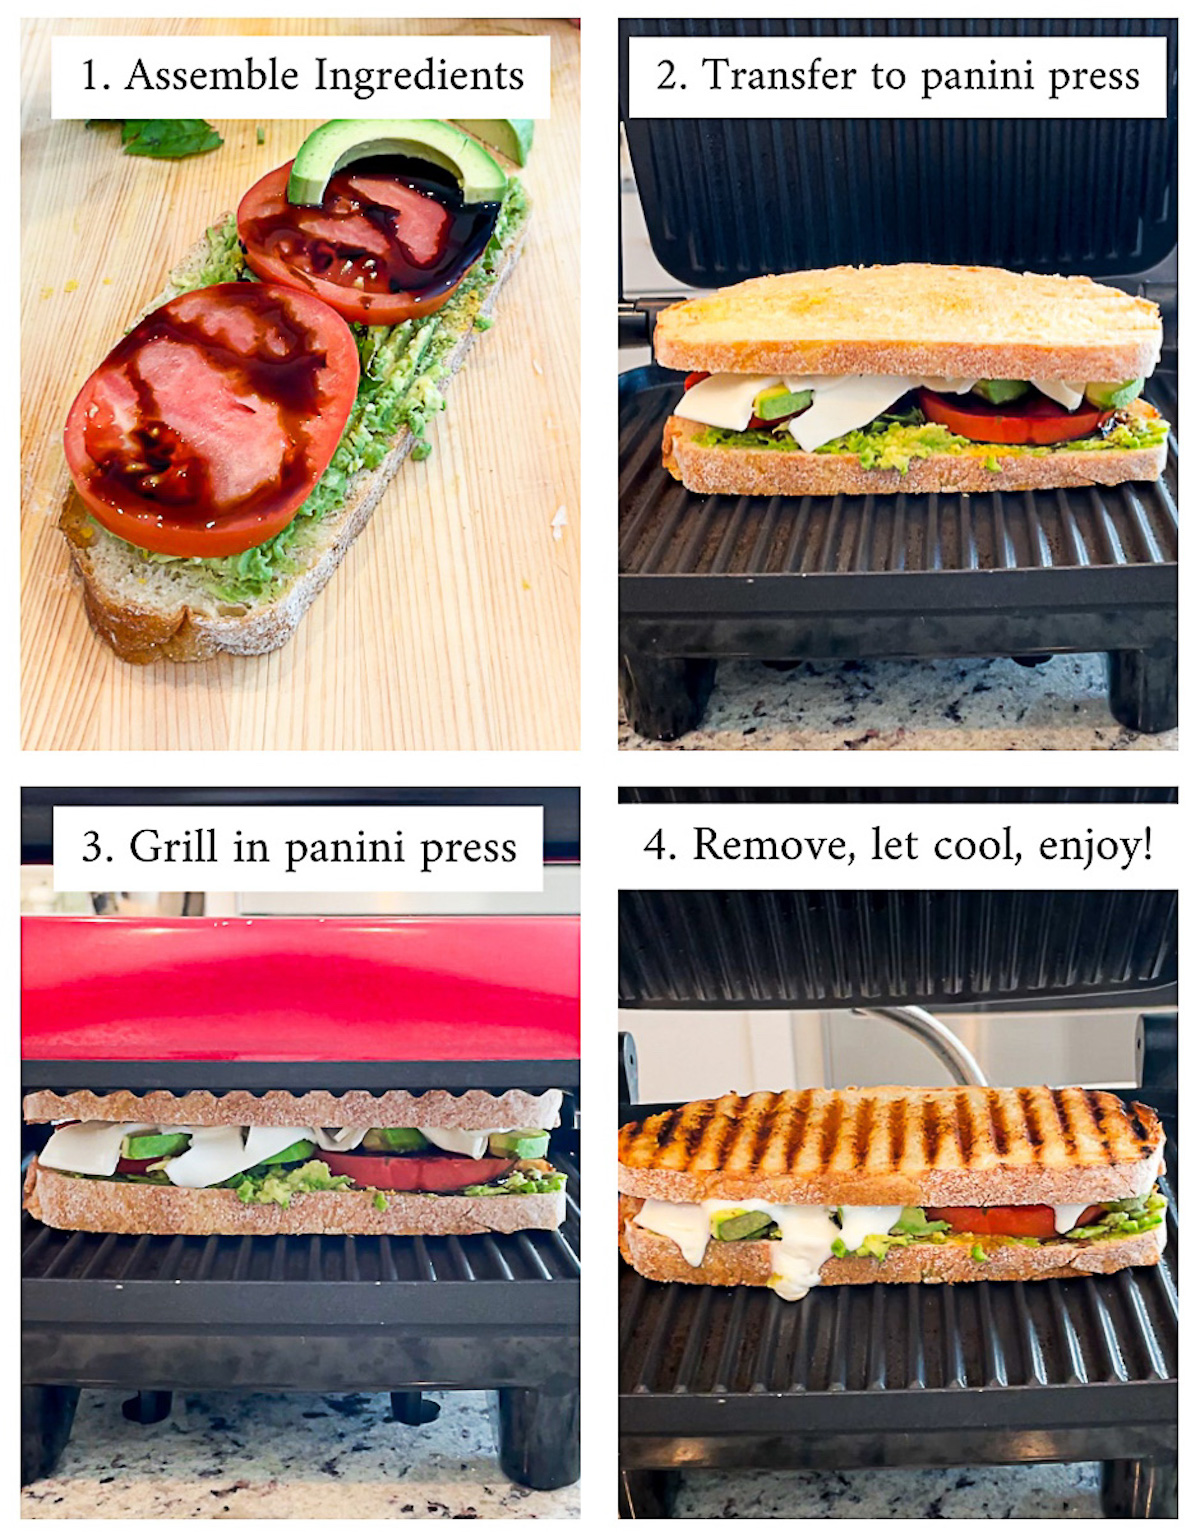 4 step-by-step instructions for how to make a panini. 1- assemble ingredients, 2. transfer panini to panini press, 3. grill in panini press, 4. remove, let cool, and enjoy!